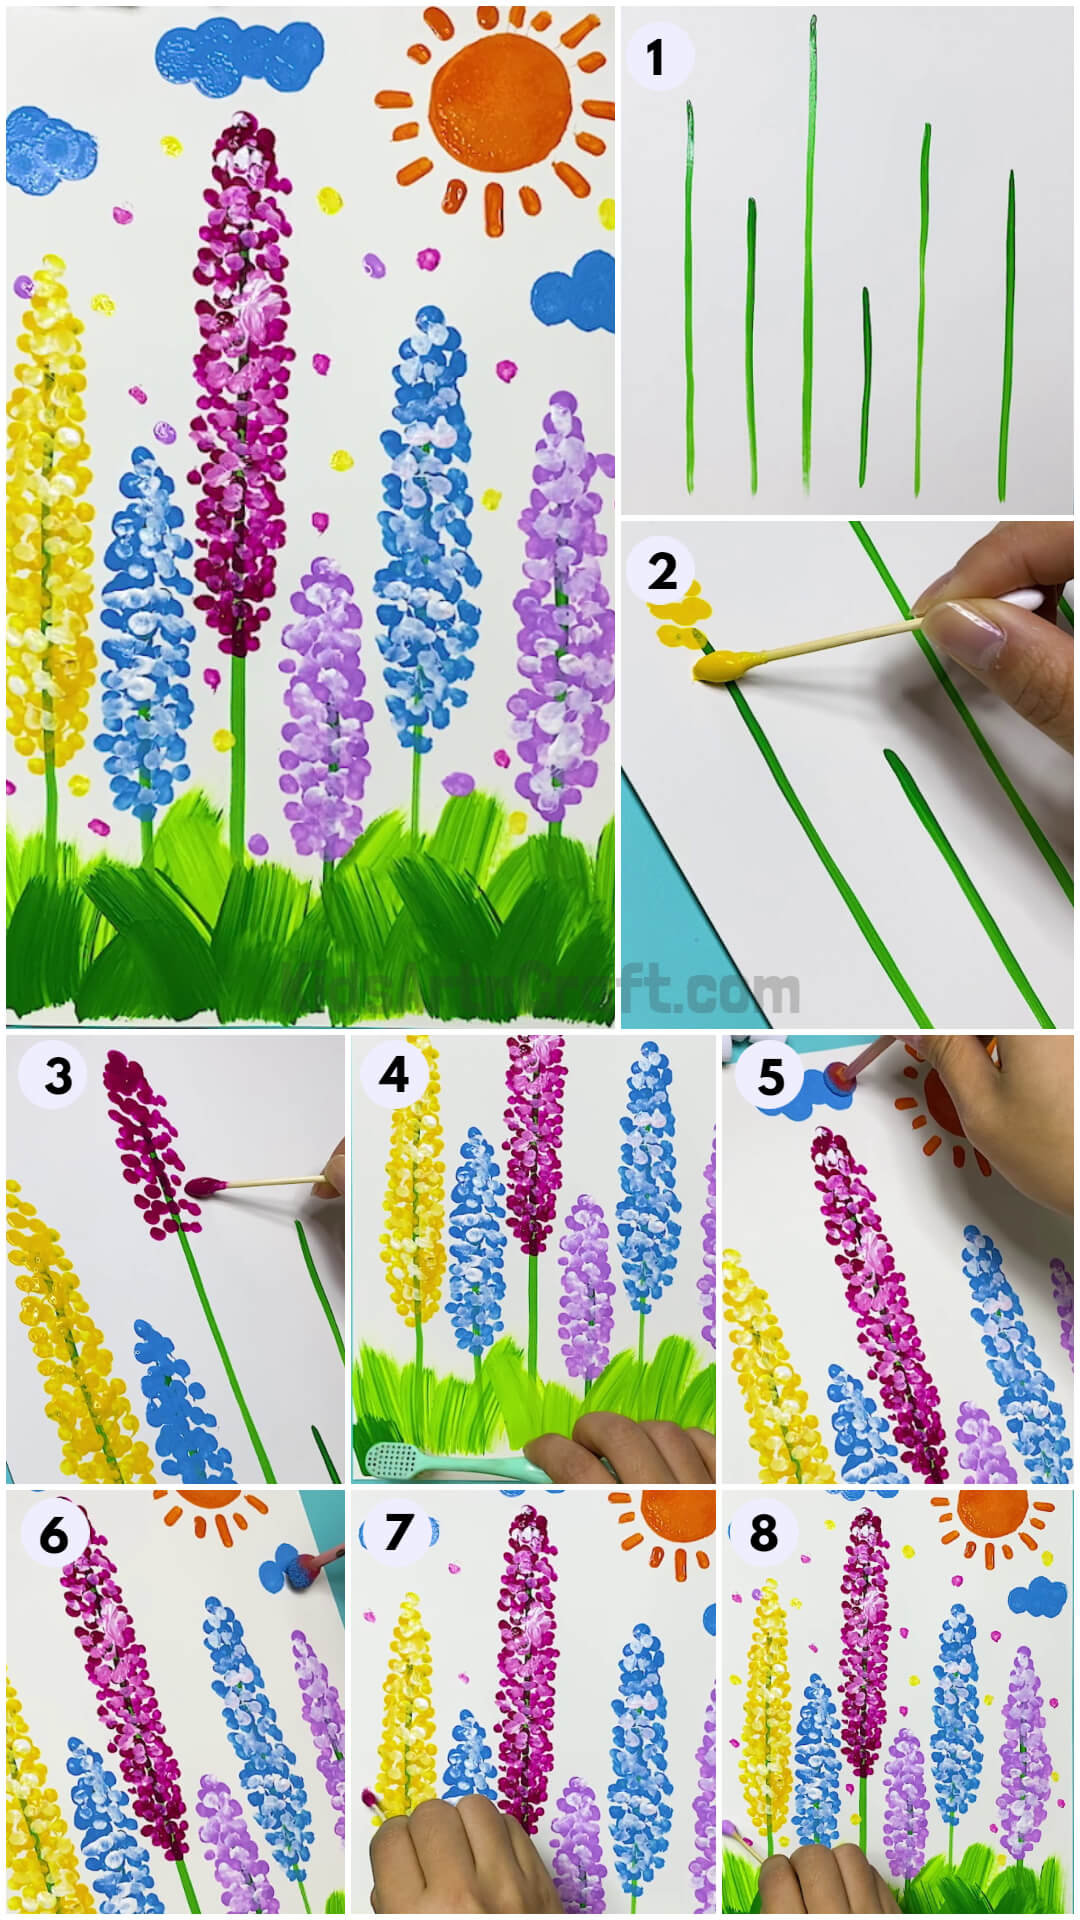 Colorful Trees Painting - Step by Step Tutorial